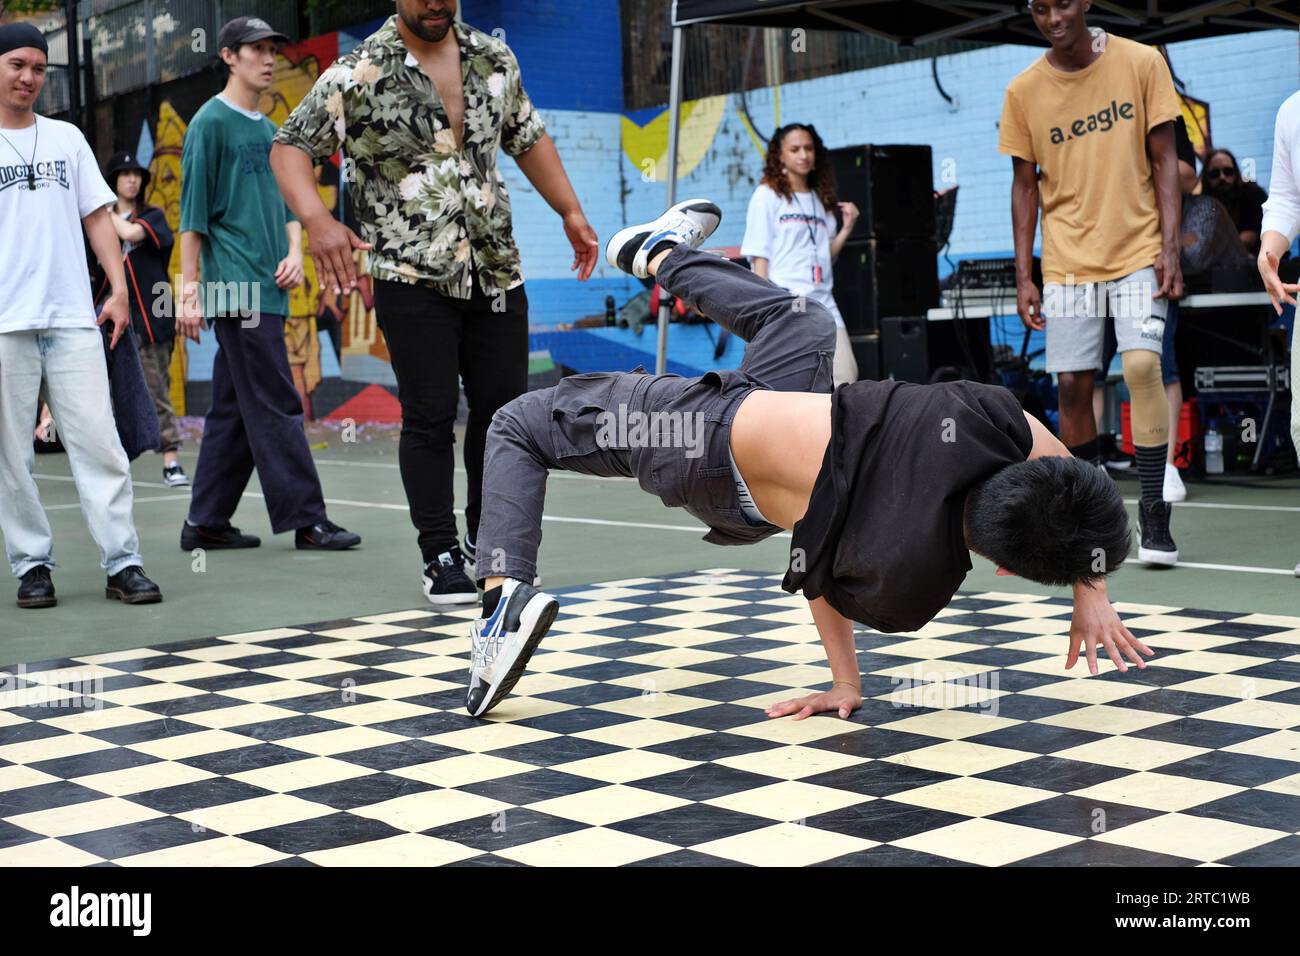 Breakdancing performances, competition and battles on the basketball courts of  Woolloomooloo, Sydney Stock Photo